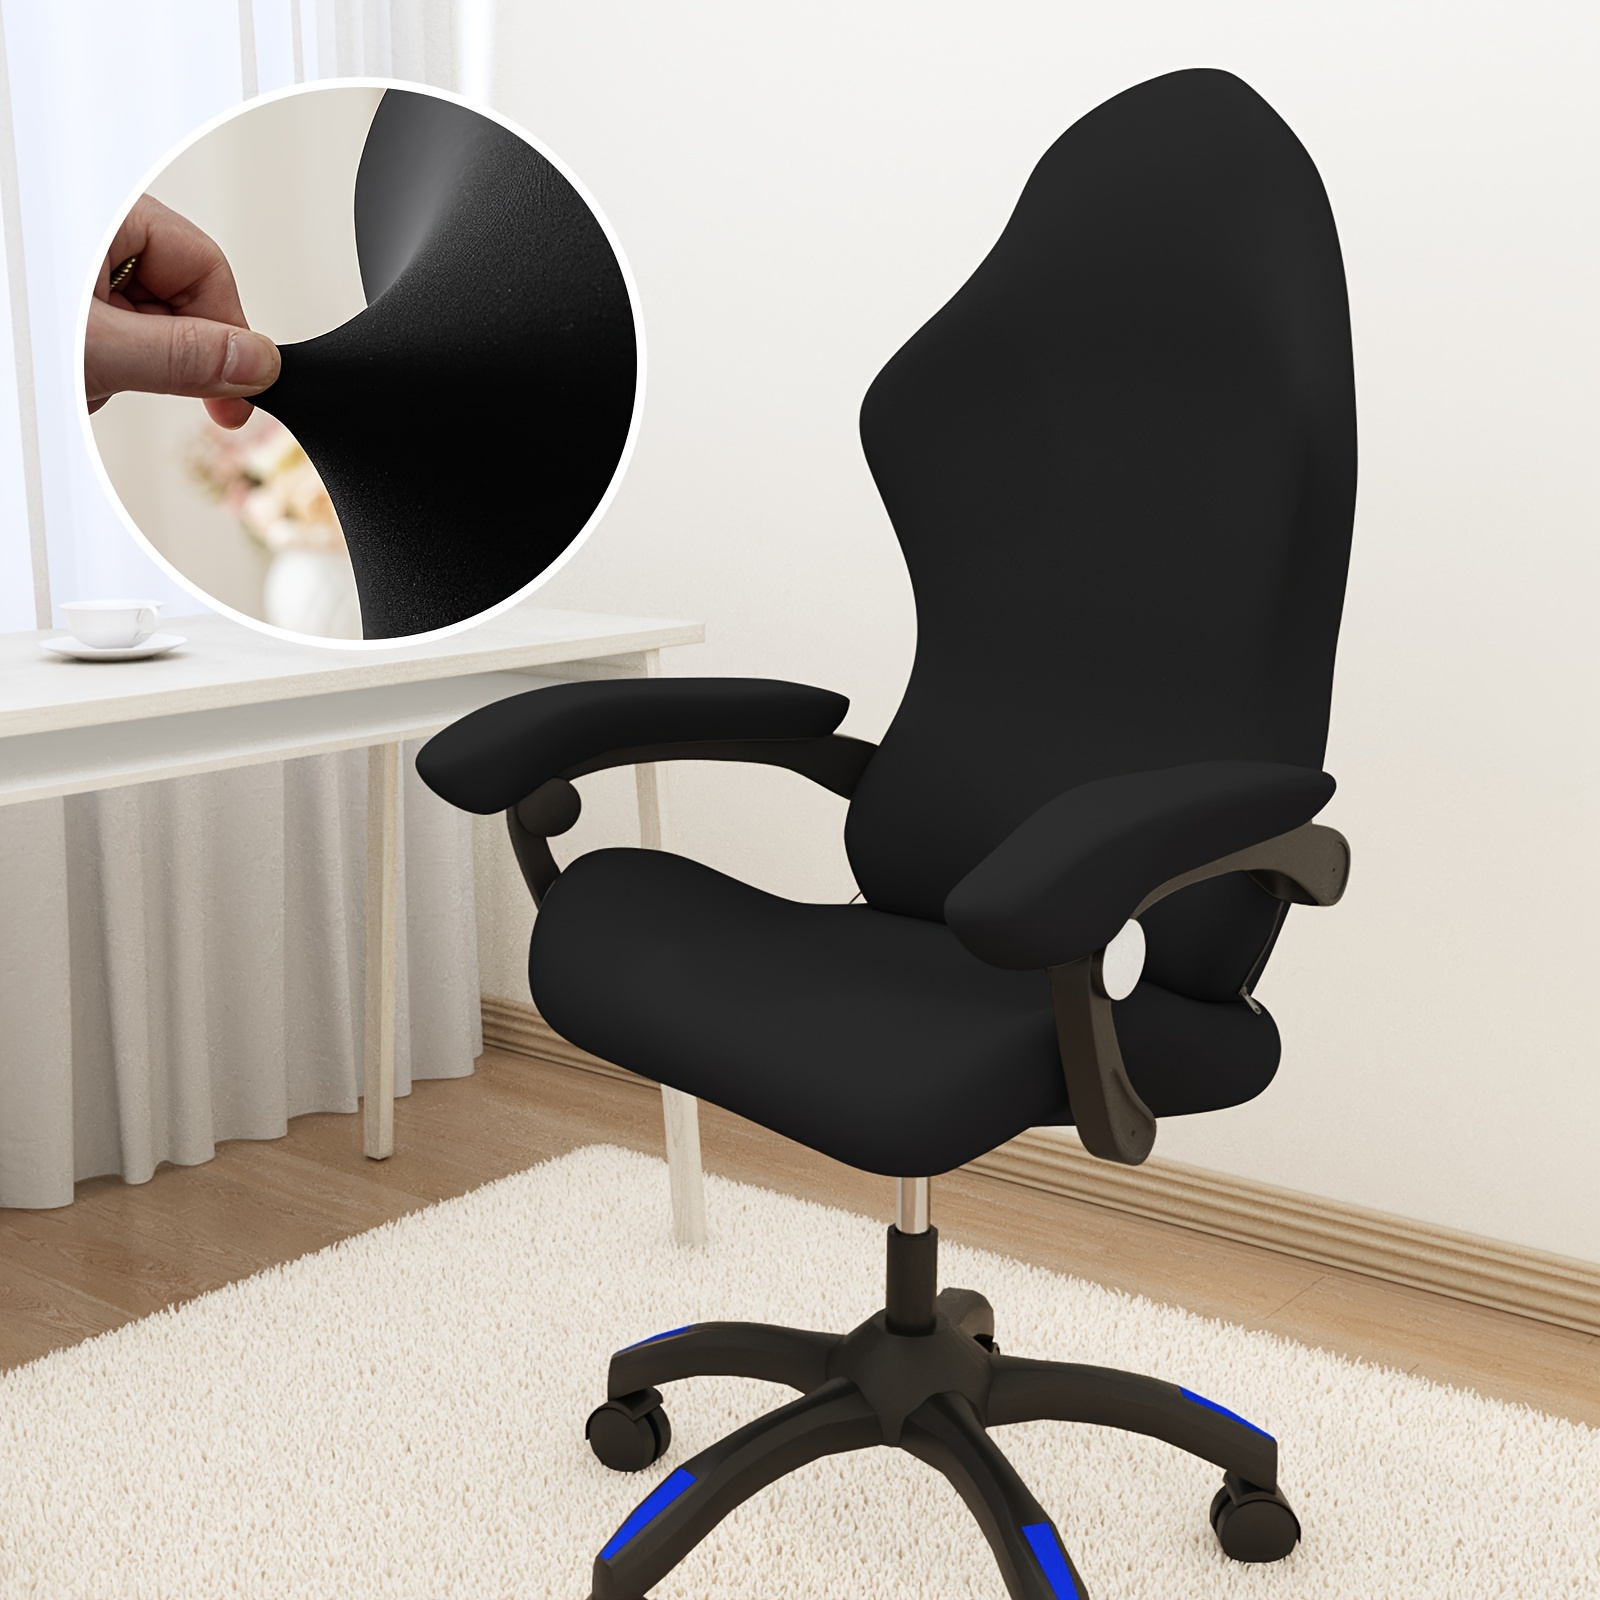 

Elastic Milk Silk Gaming Chair Cover - Solid Color, Stretchable Swivel Office Chair Slipcover With Zipper Closure, Machine Washable Fabric Protector For Home Decor, Fits Most Chairs - 1pc